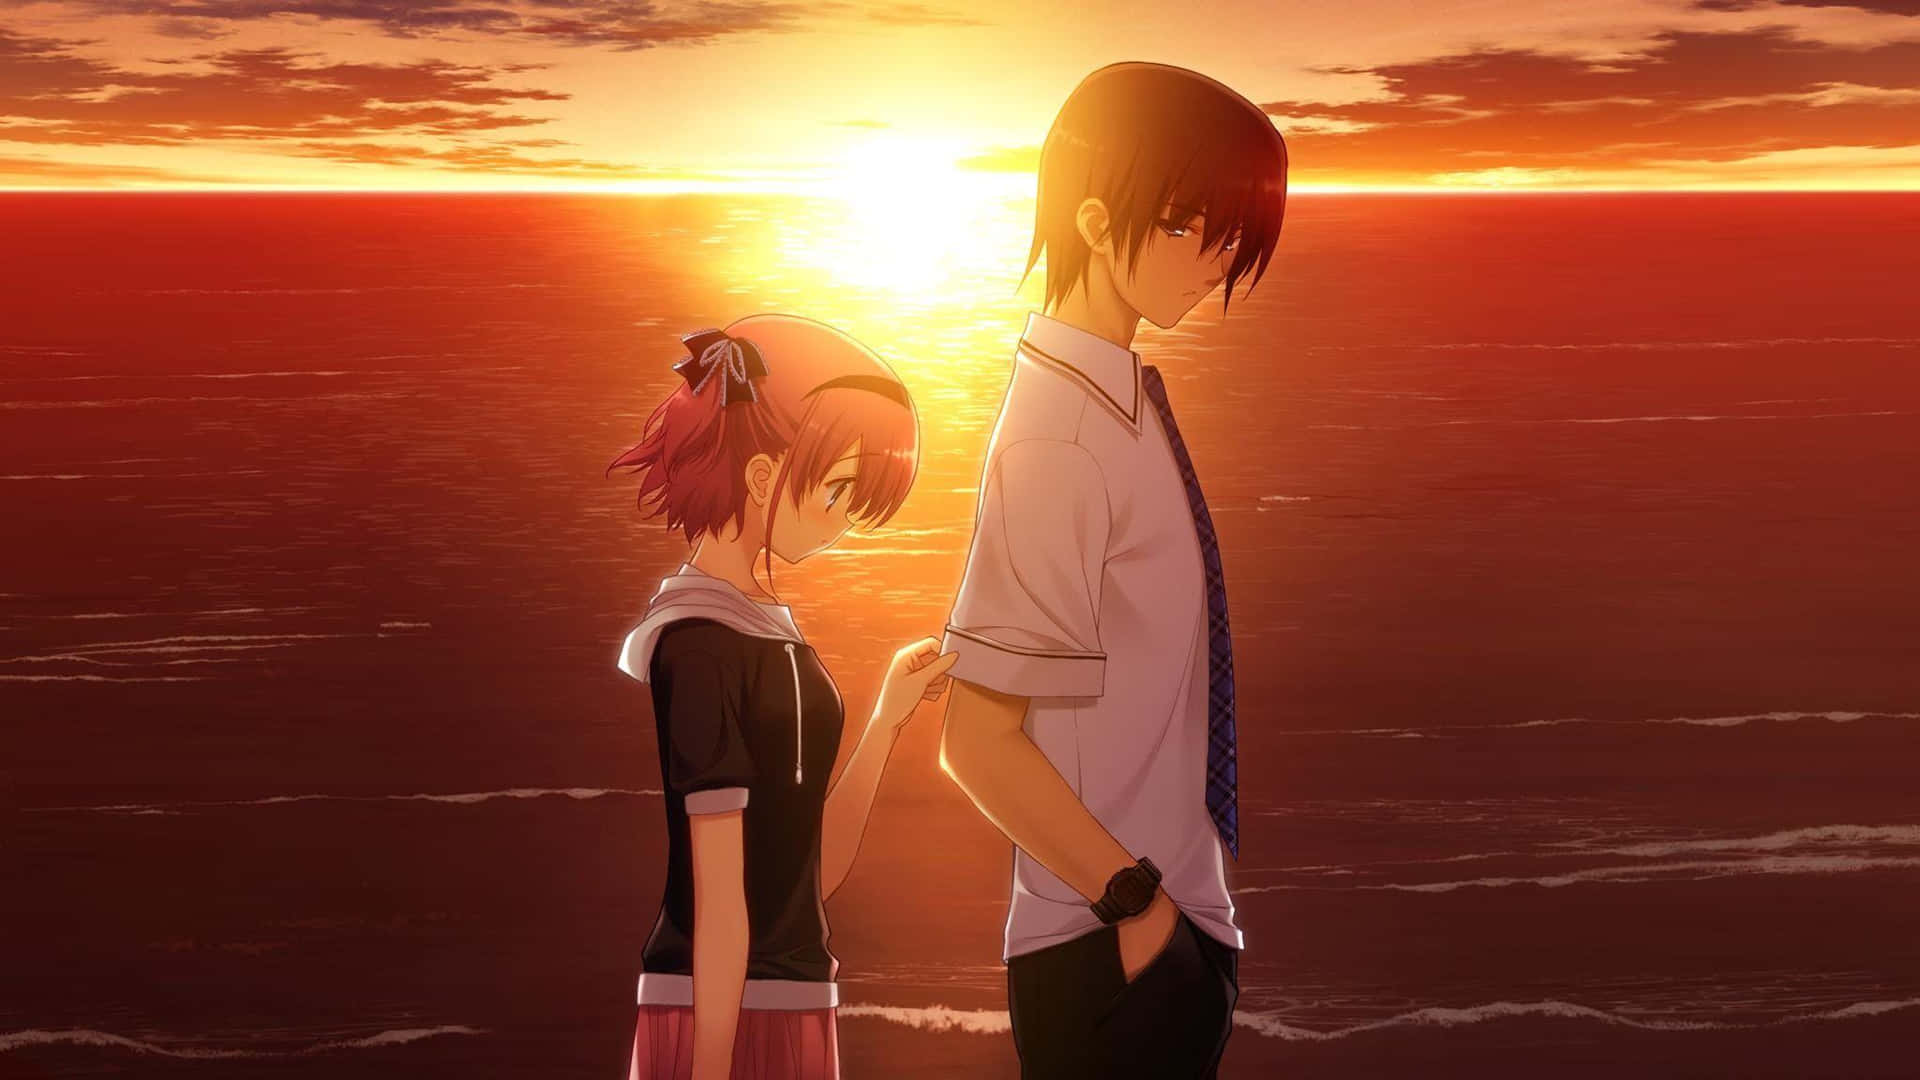 Two Anime Characters Standing On The Beach At Sunset